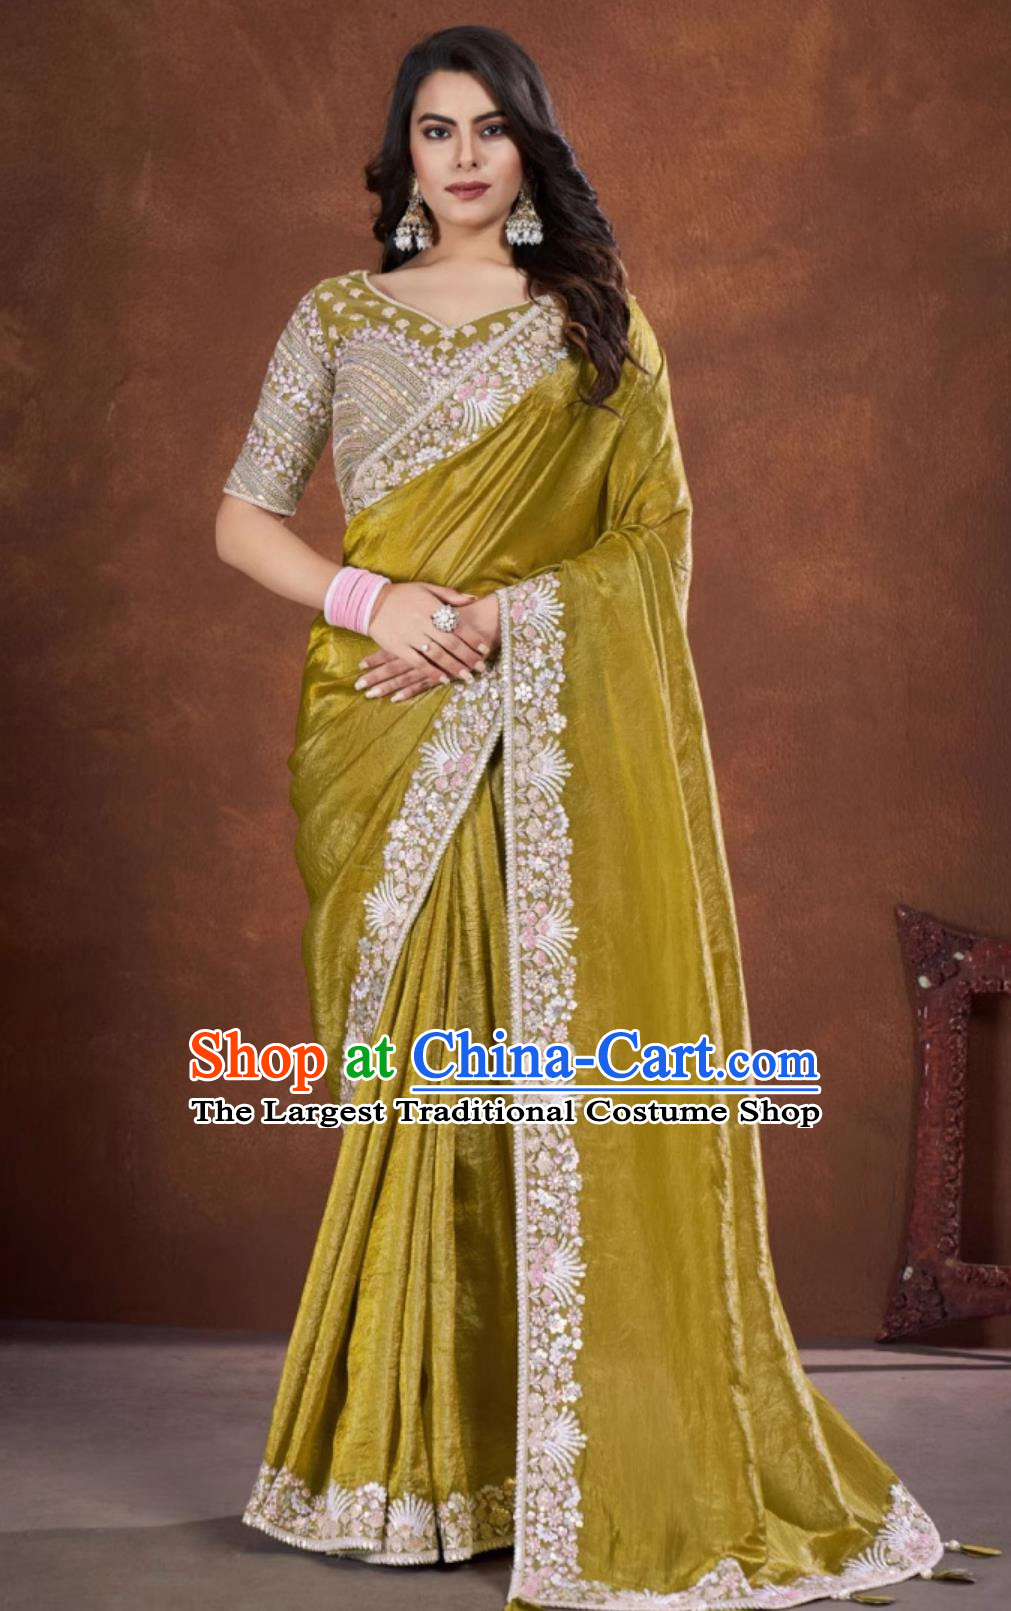 Indian Traditional Women Clothing India Embroidery Ginger Dress Festival Sari National Costume